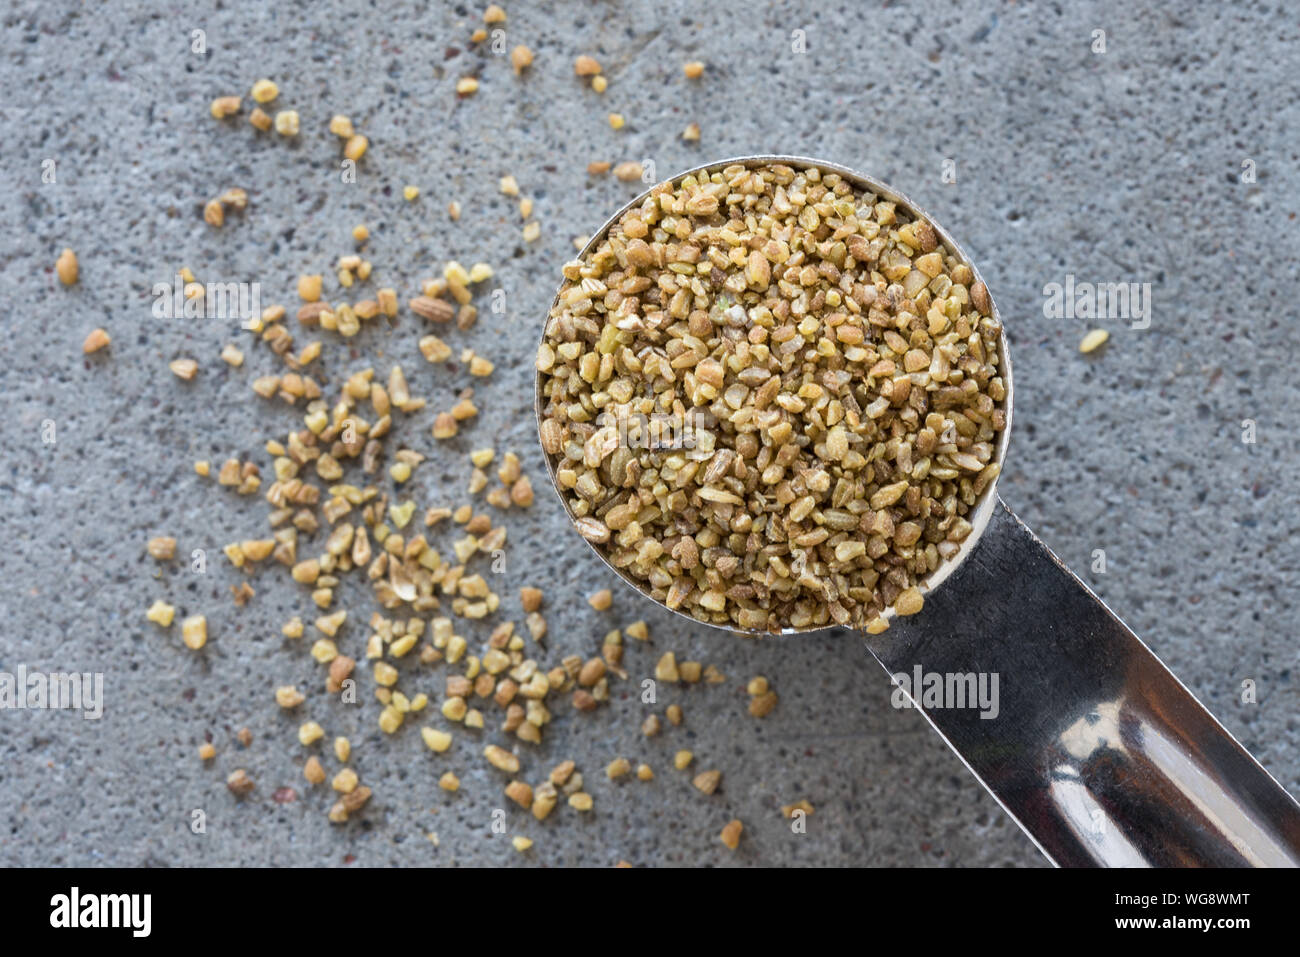 High Angle View Of Spice In Teaspoon Stock Photo